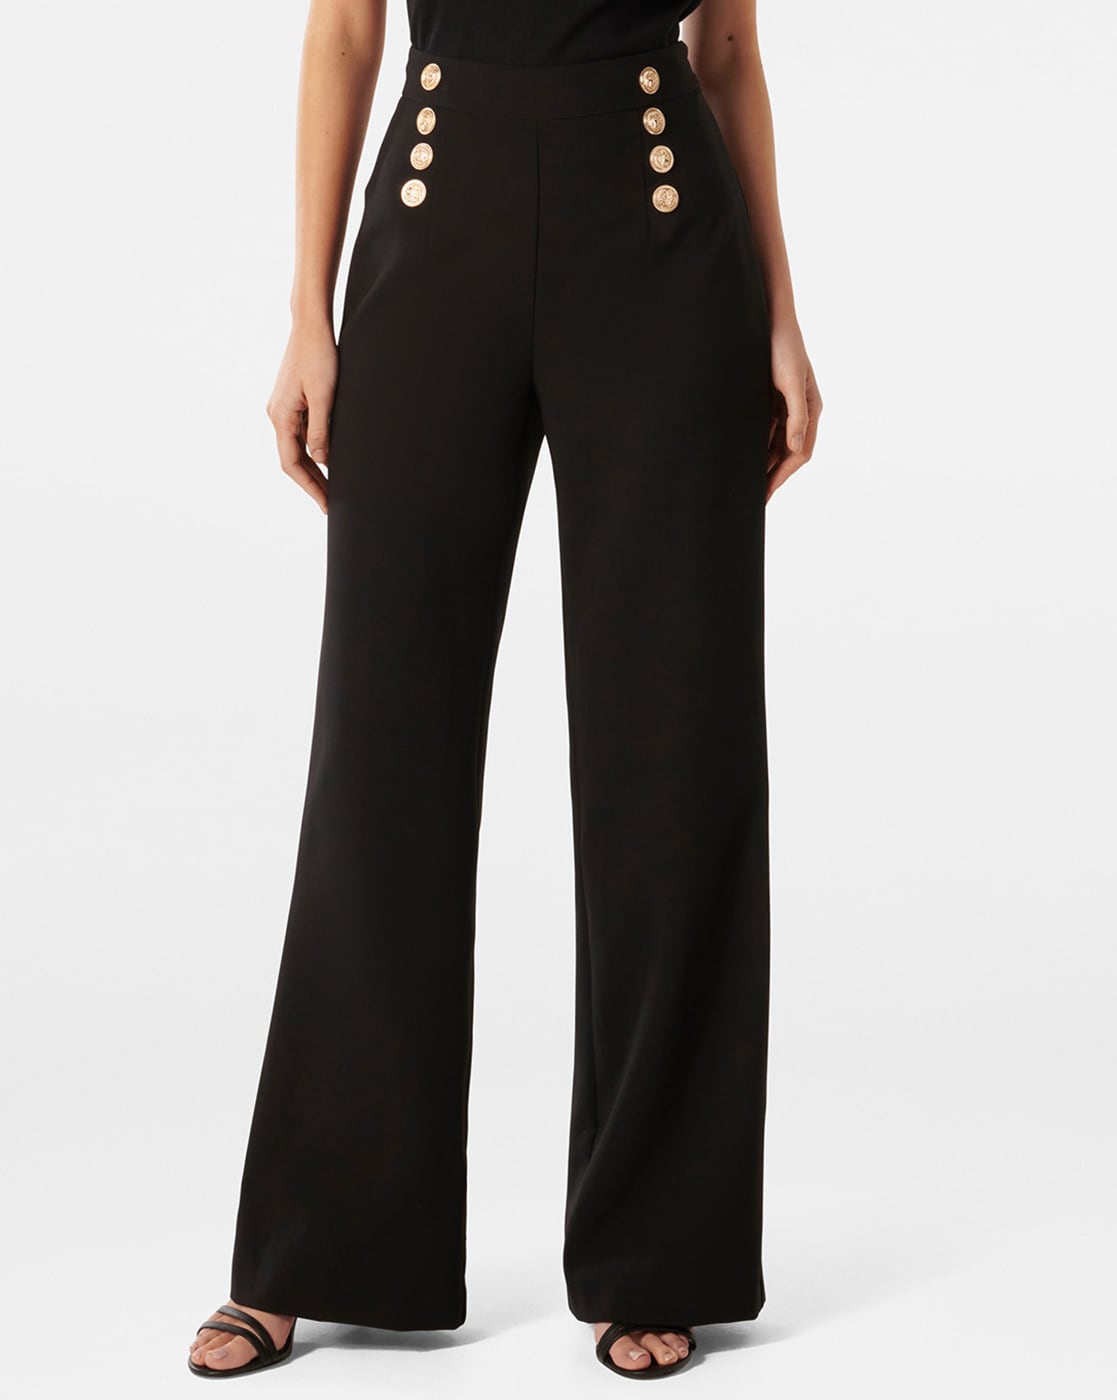 The Perfect Pant, High-Rise Flare Pants for Women | SPANX